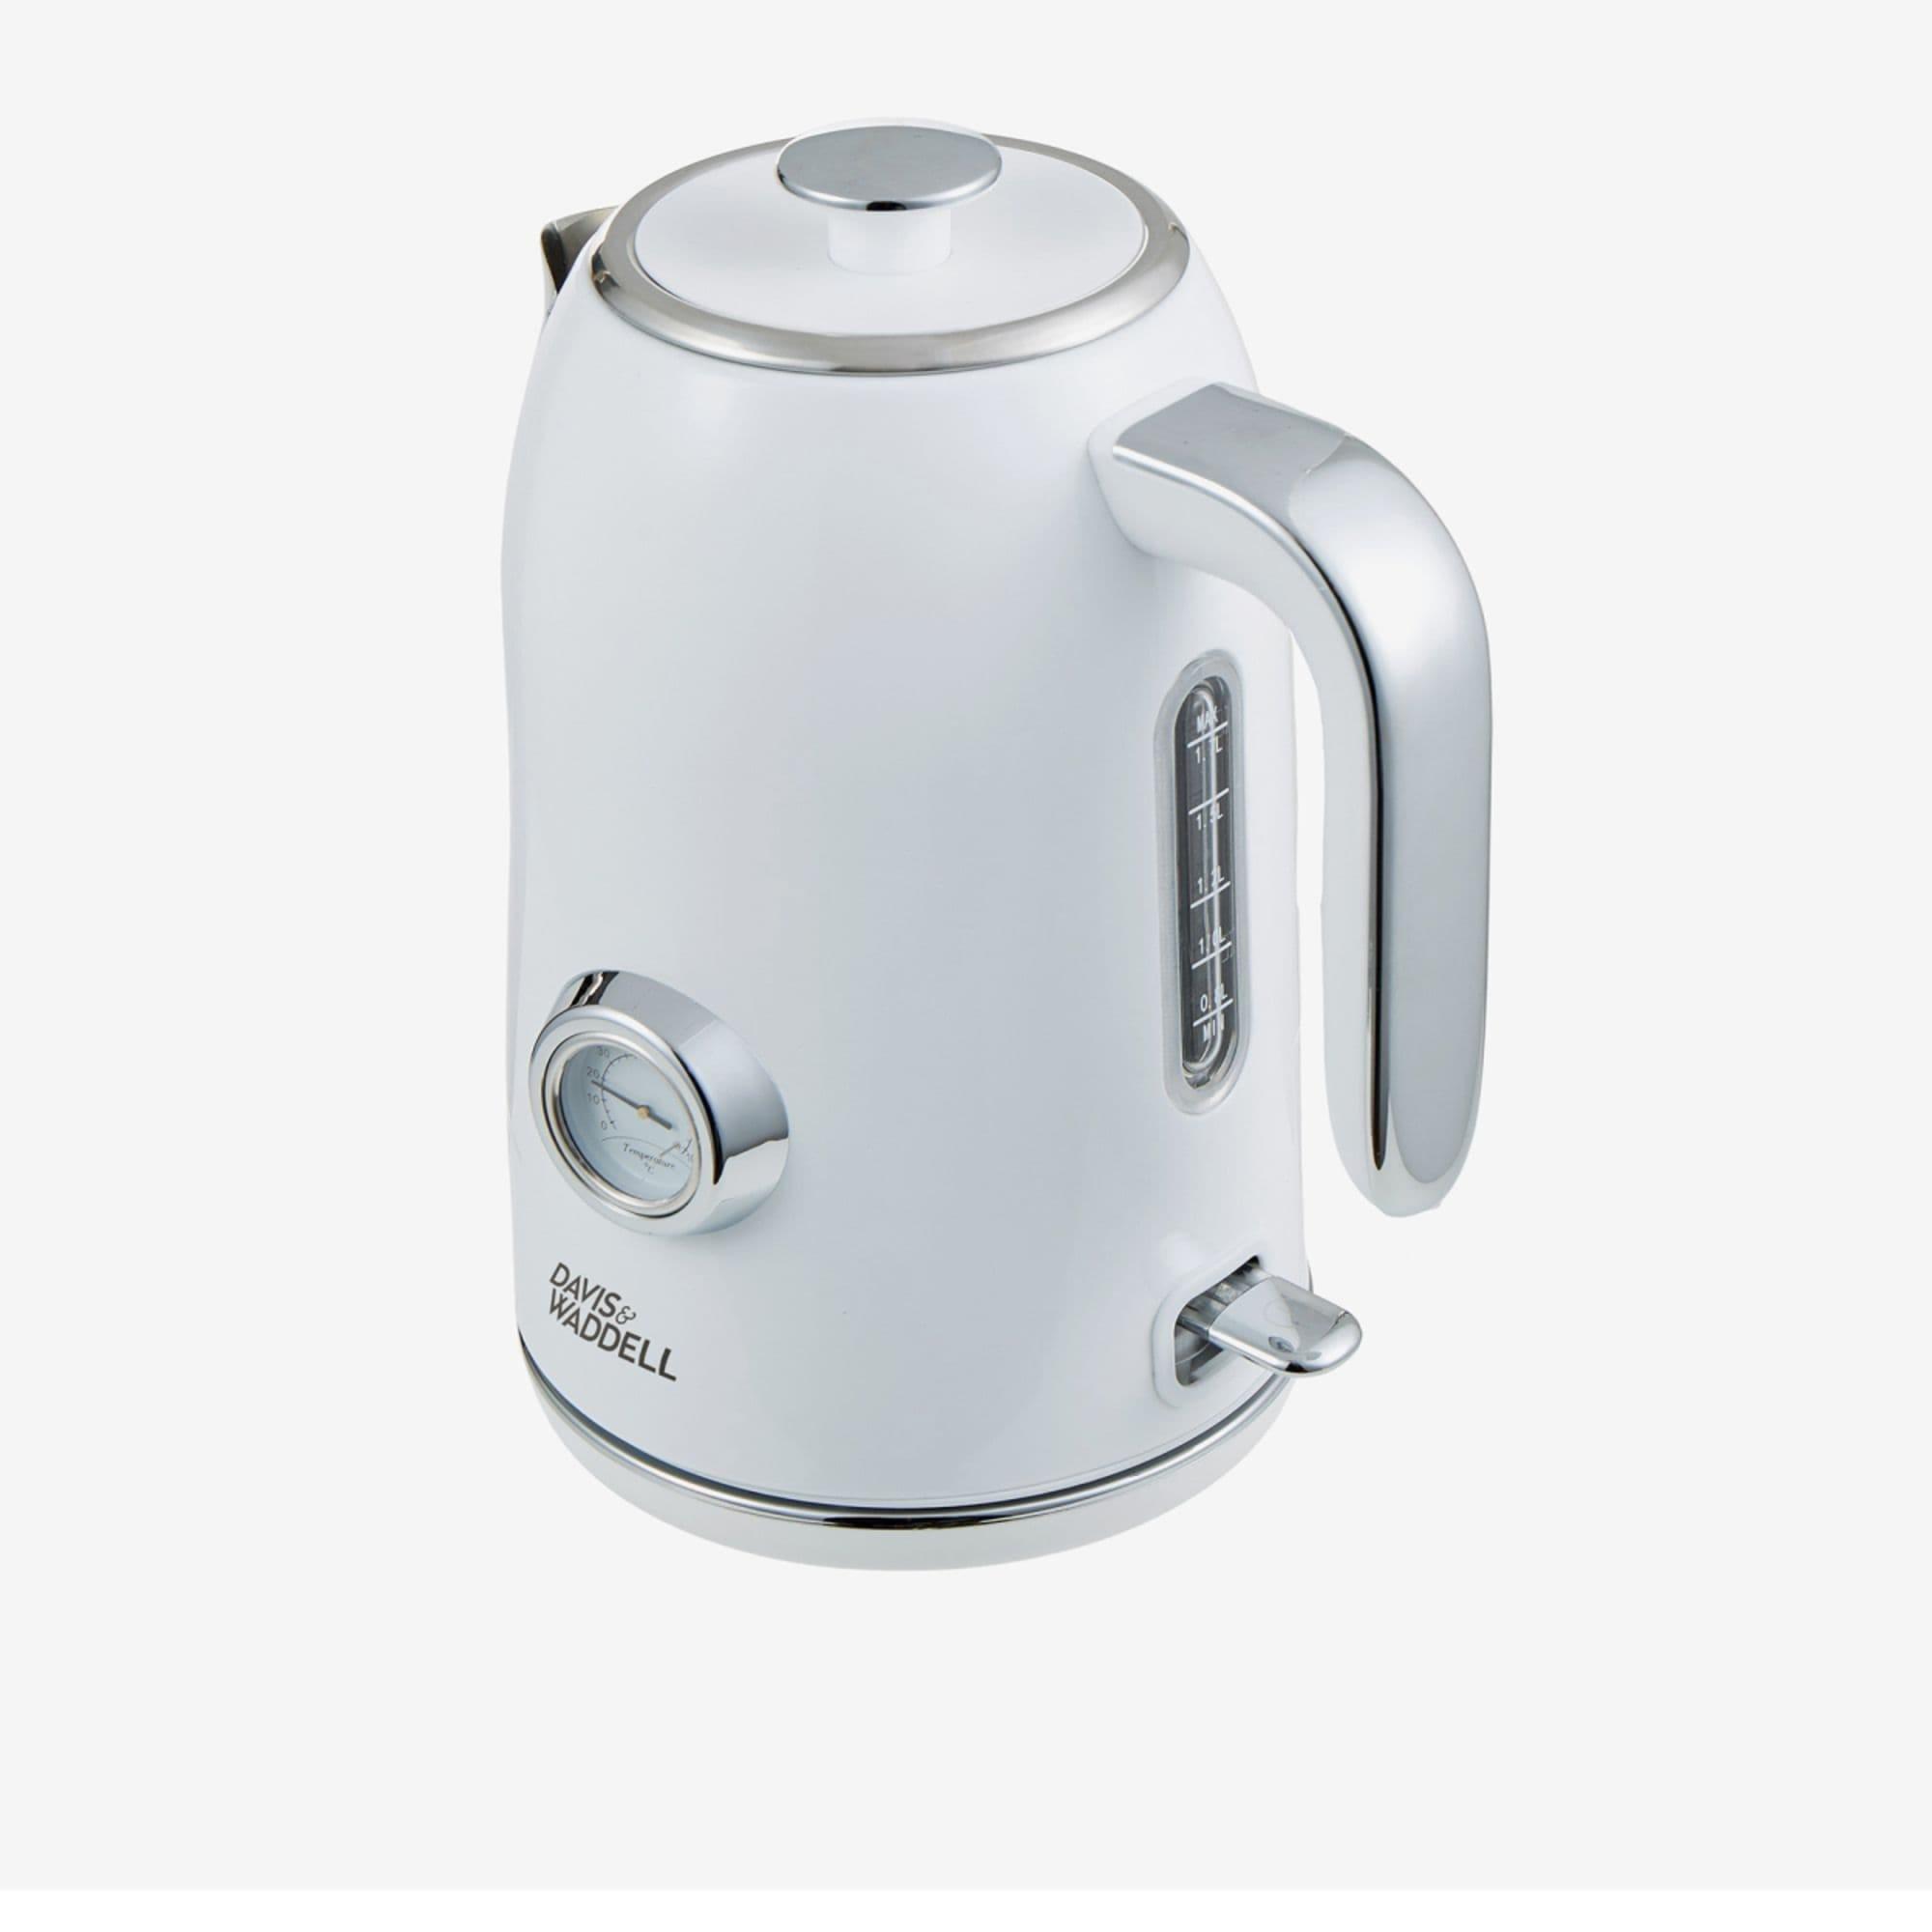 Davis & Waddell Manor Electric Kettle 1.7L White Image 3